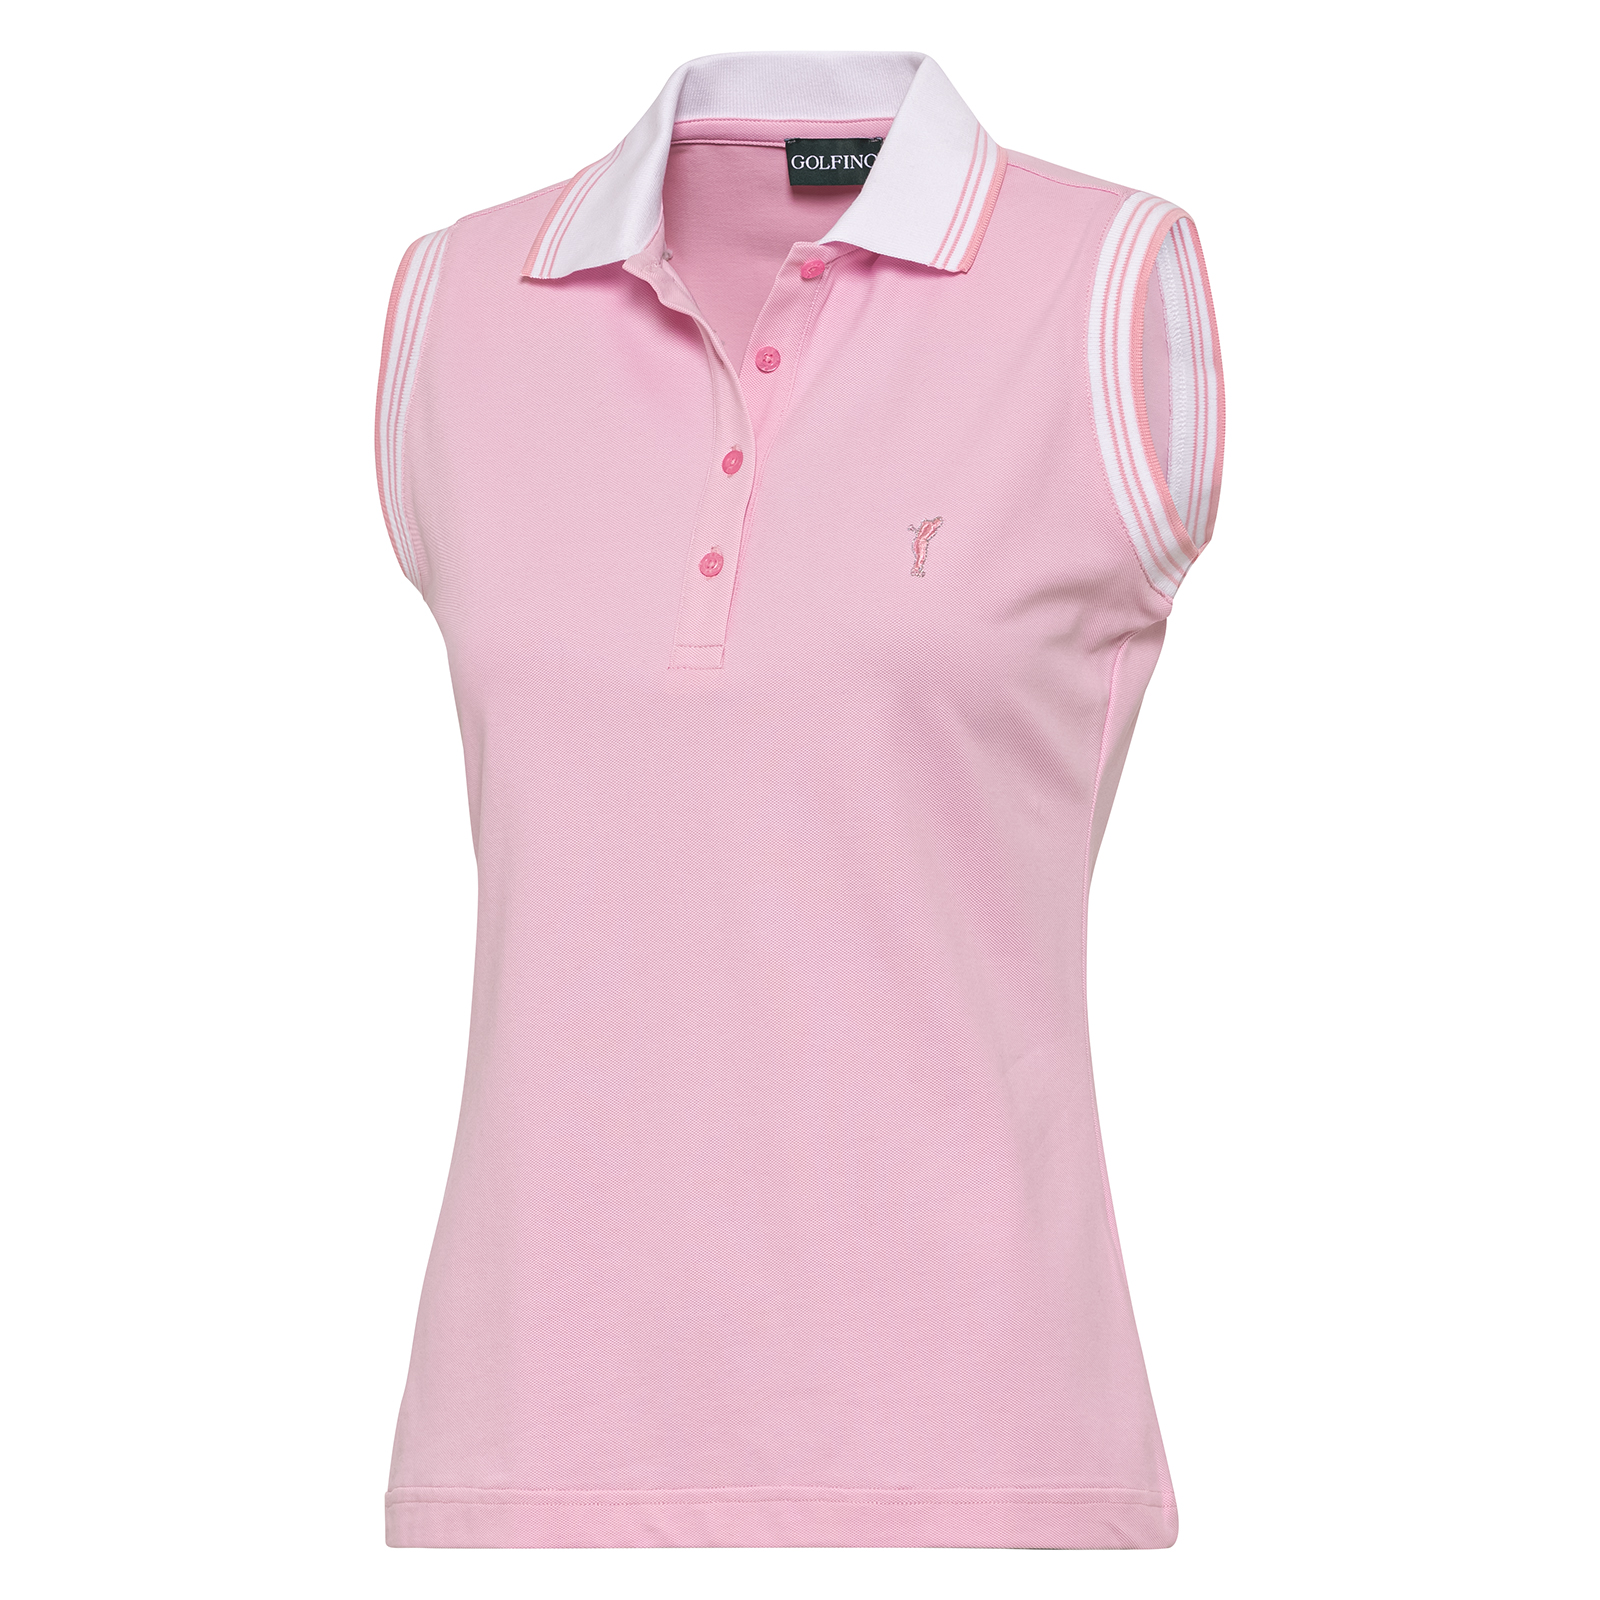 Airy ladies' polo shirt with ultraviolet protection